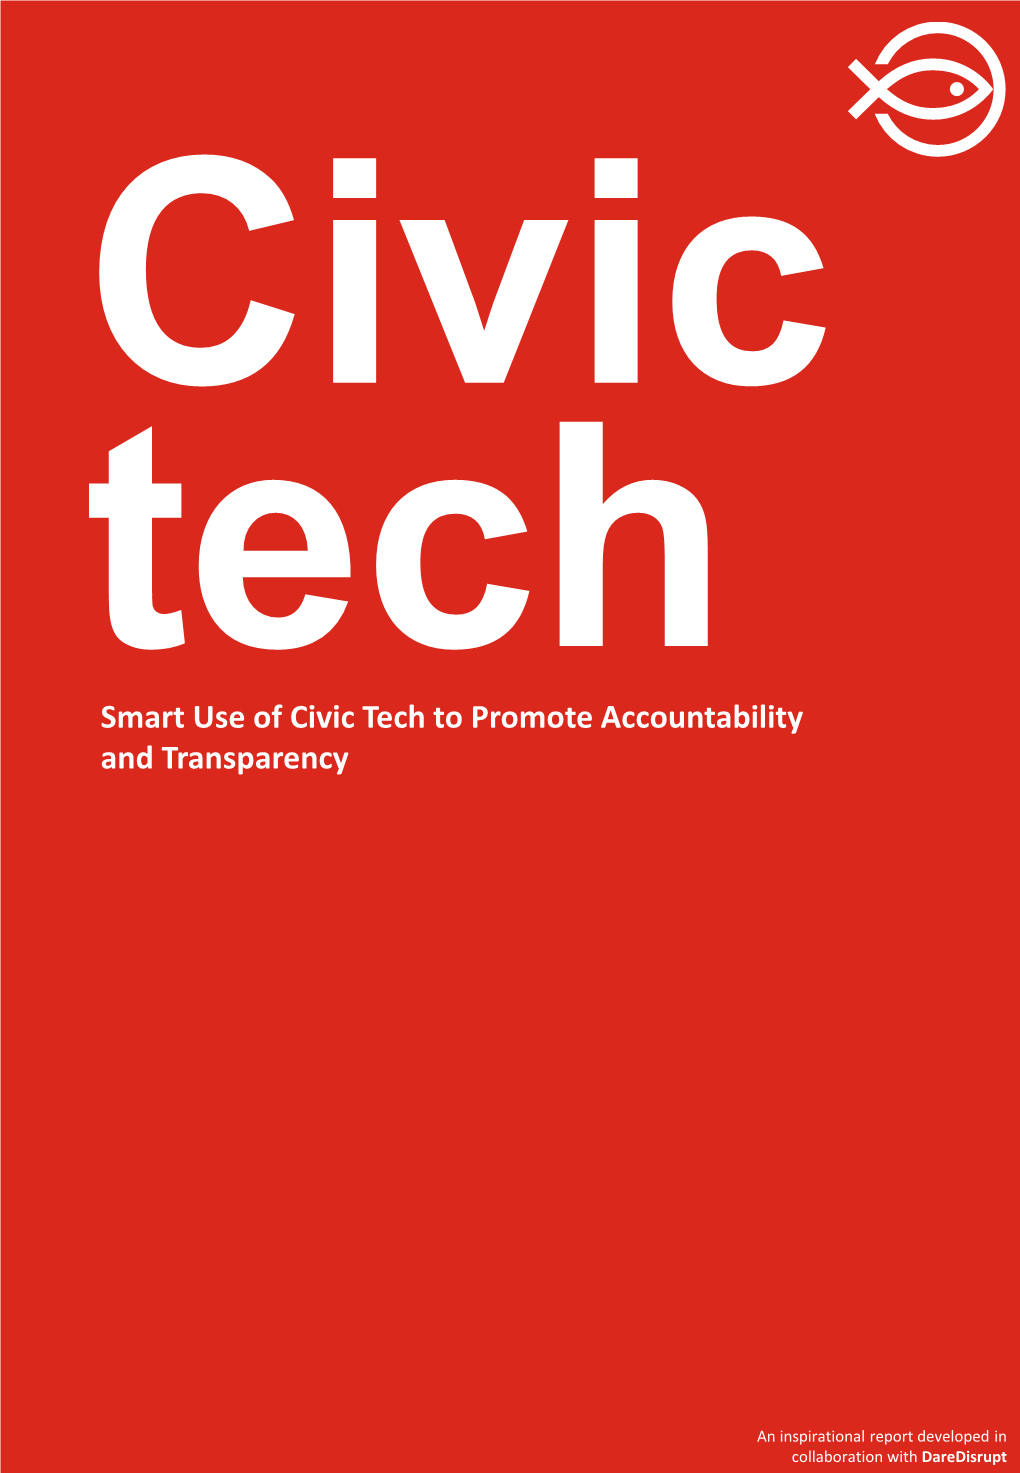 Smart Use of Civic Tech to Promote Accountability and Transparency